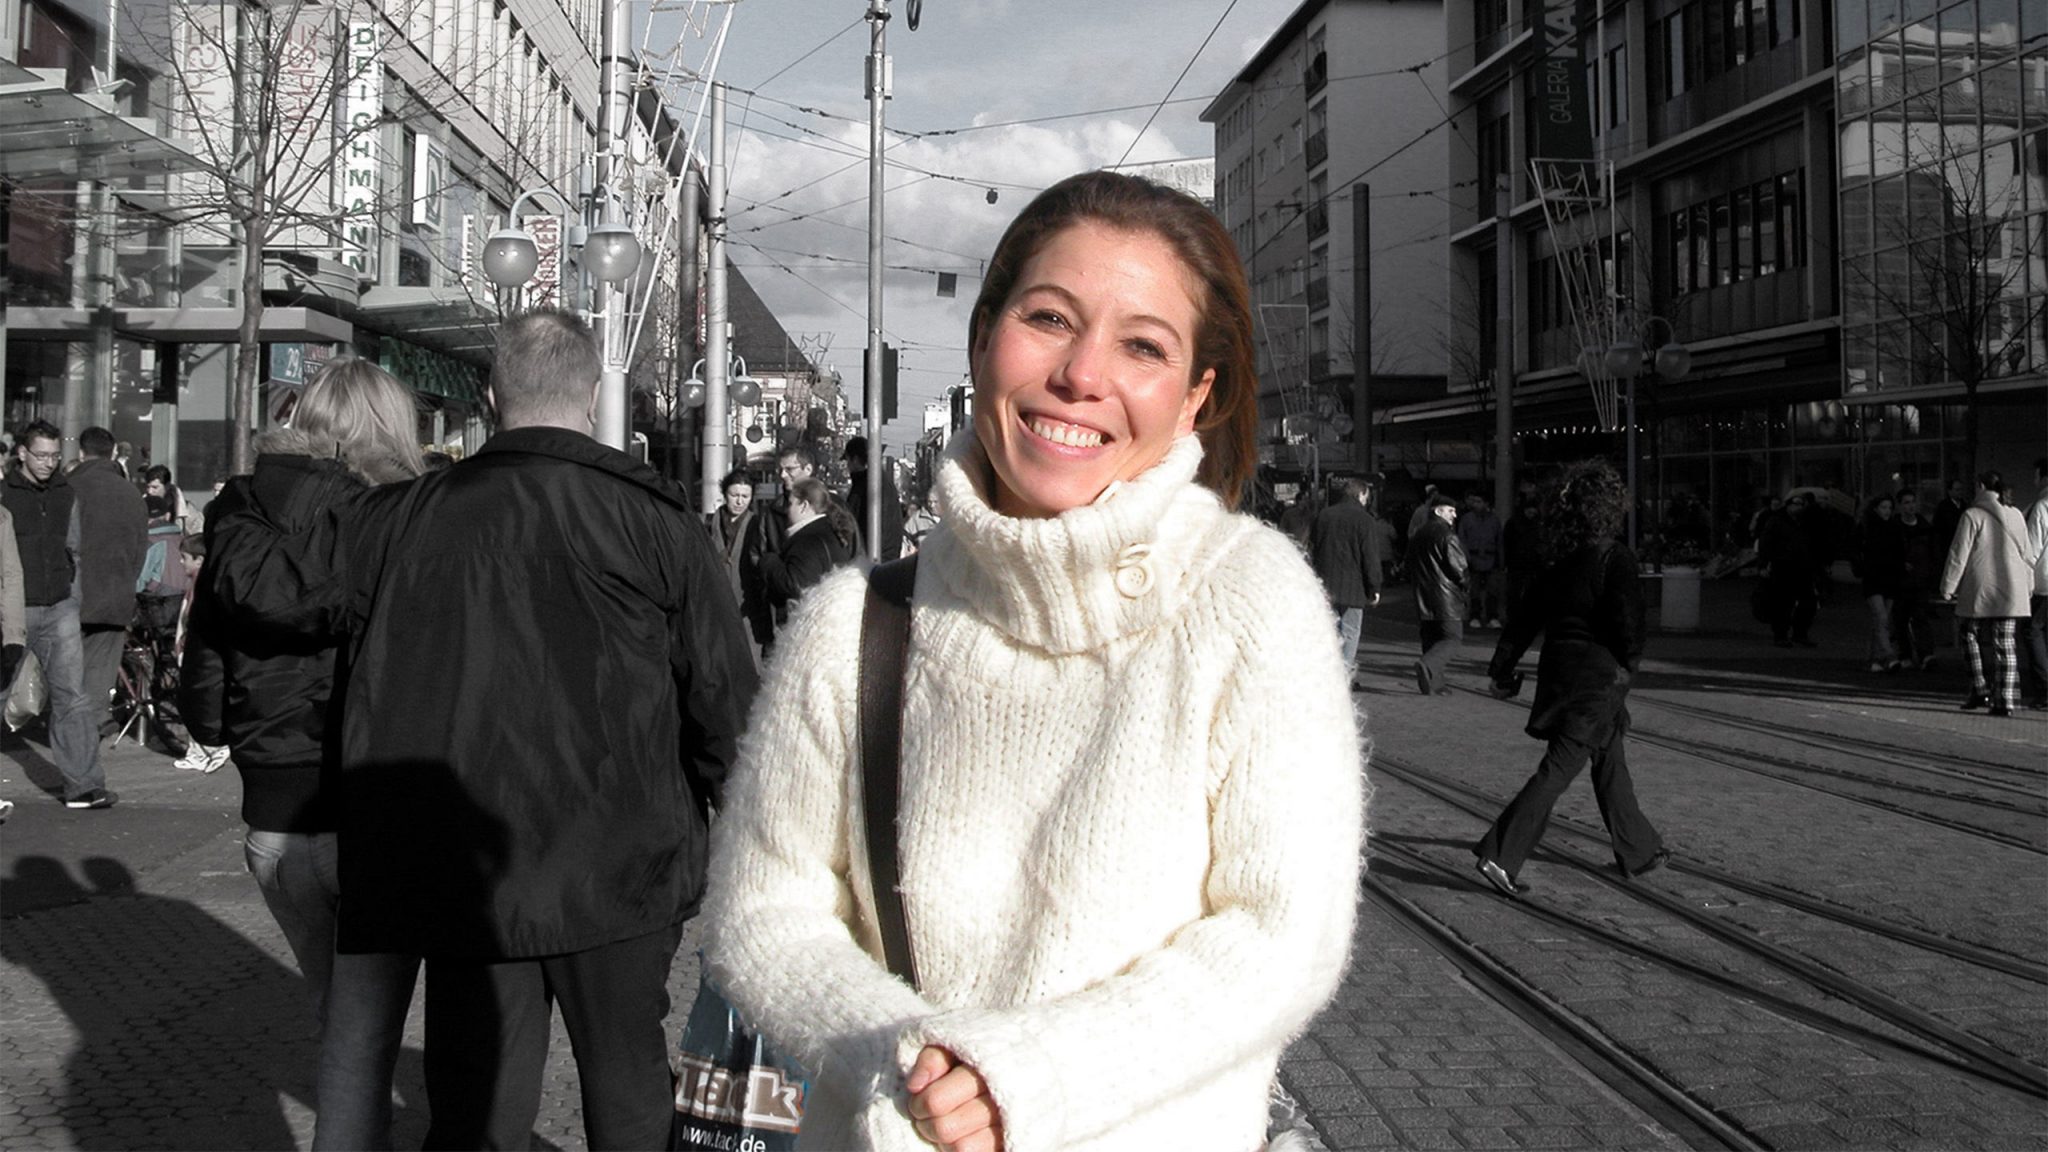 Smiling lady set among busy street of an industrial German City. Used for "InterBe" – a Mental Health Charity publicity